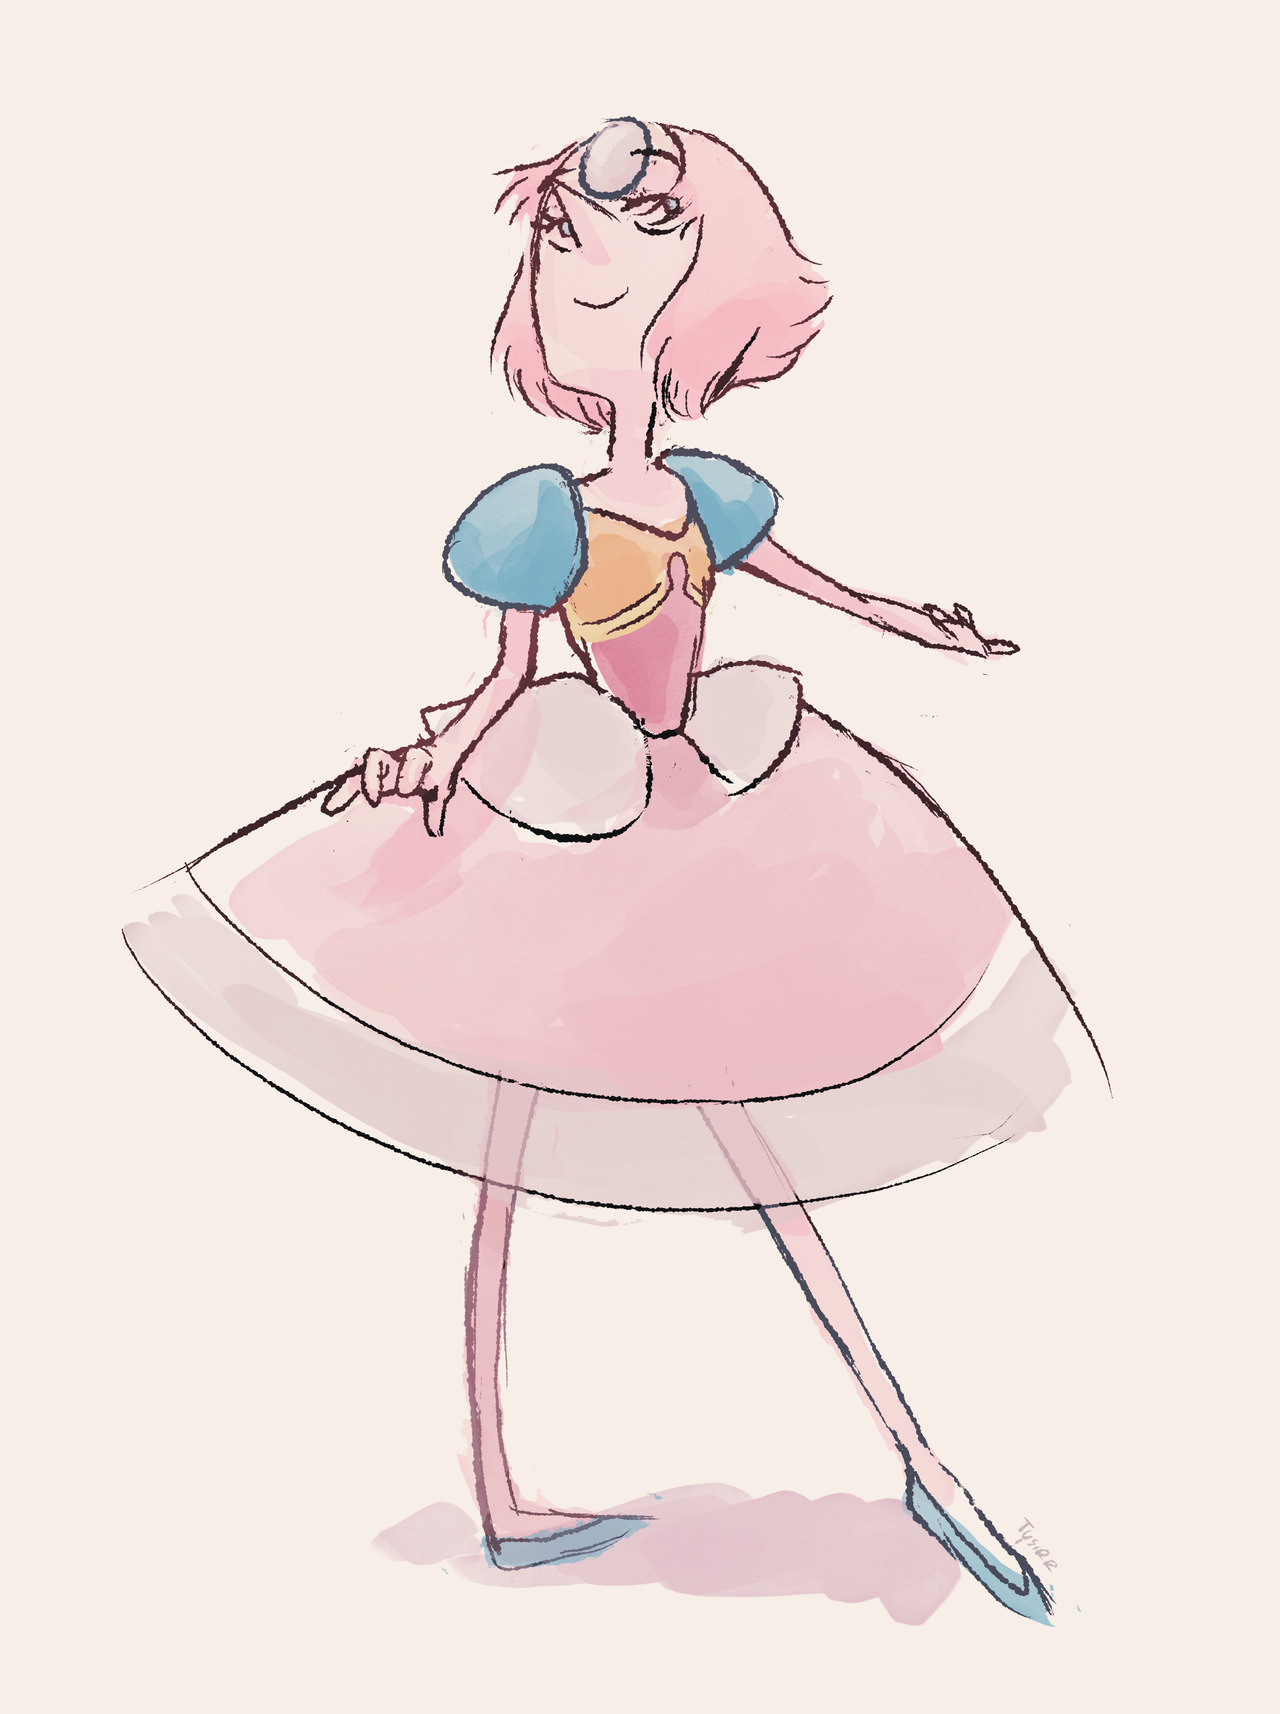 Pearl - Single Pale Rose I really love her dress from that episode. It’s simple and cute at the same time